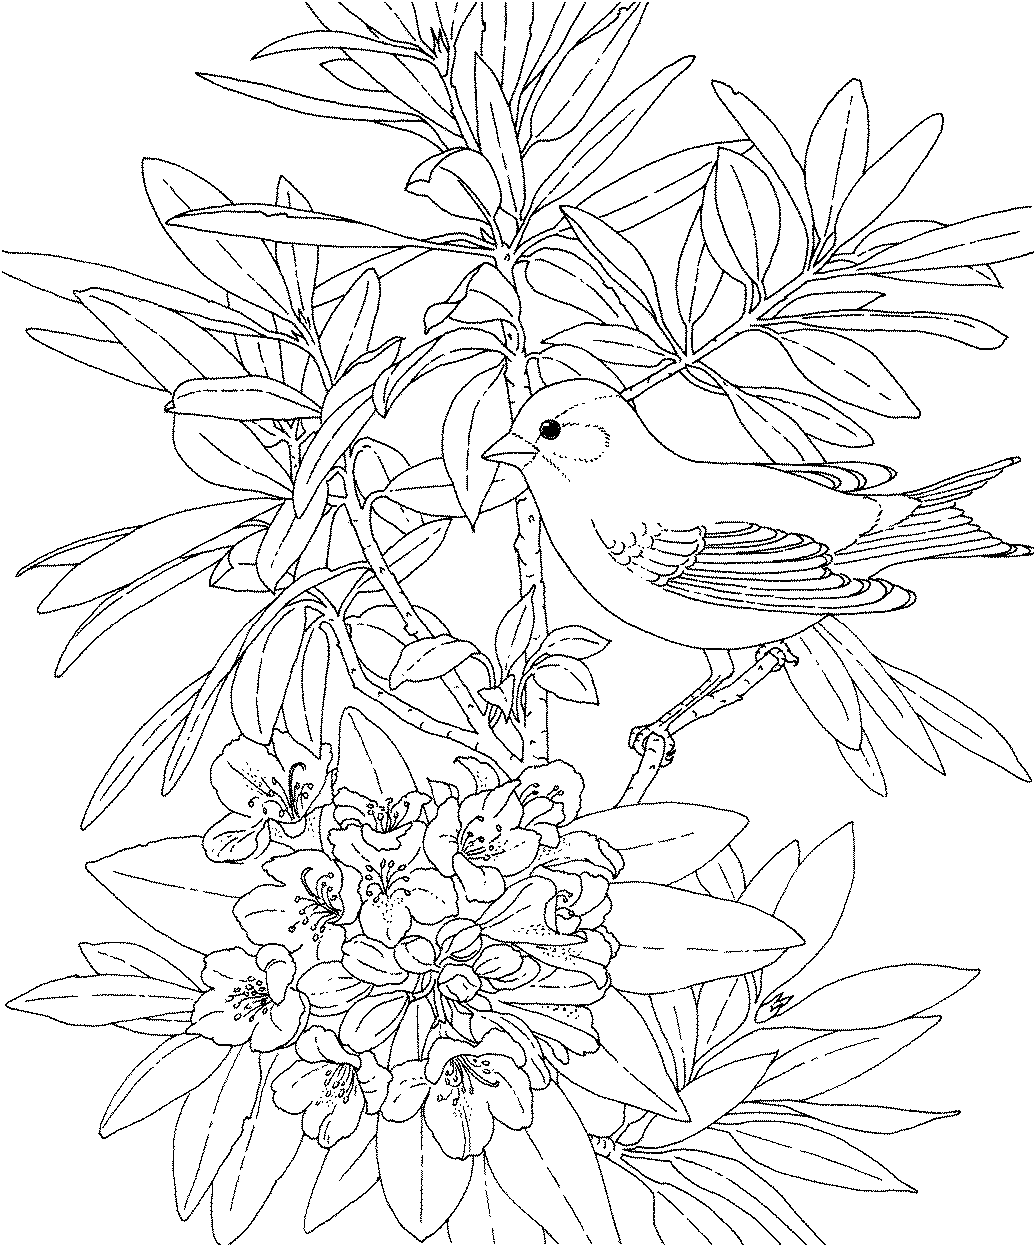 bird coloring pages to print free bird coloring pages bird coloring sheet church to bird coloring pages print 